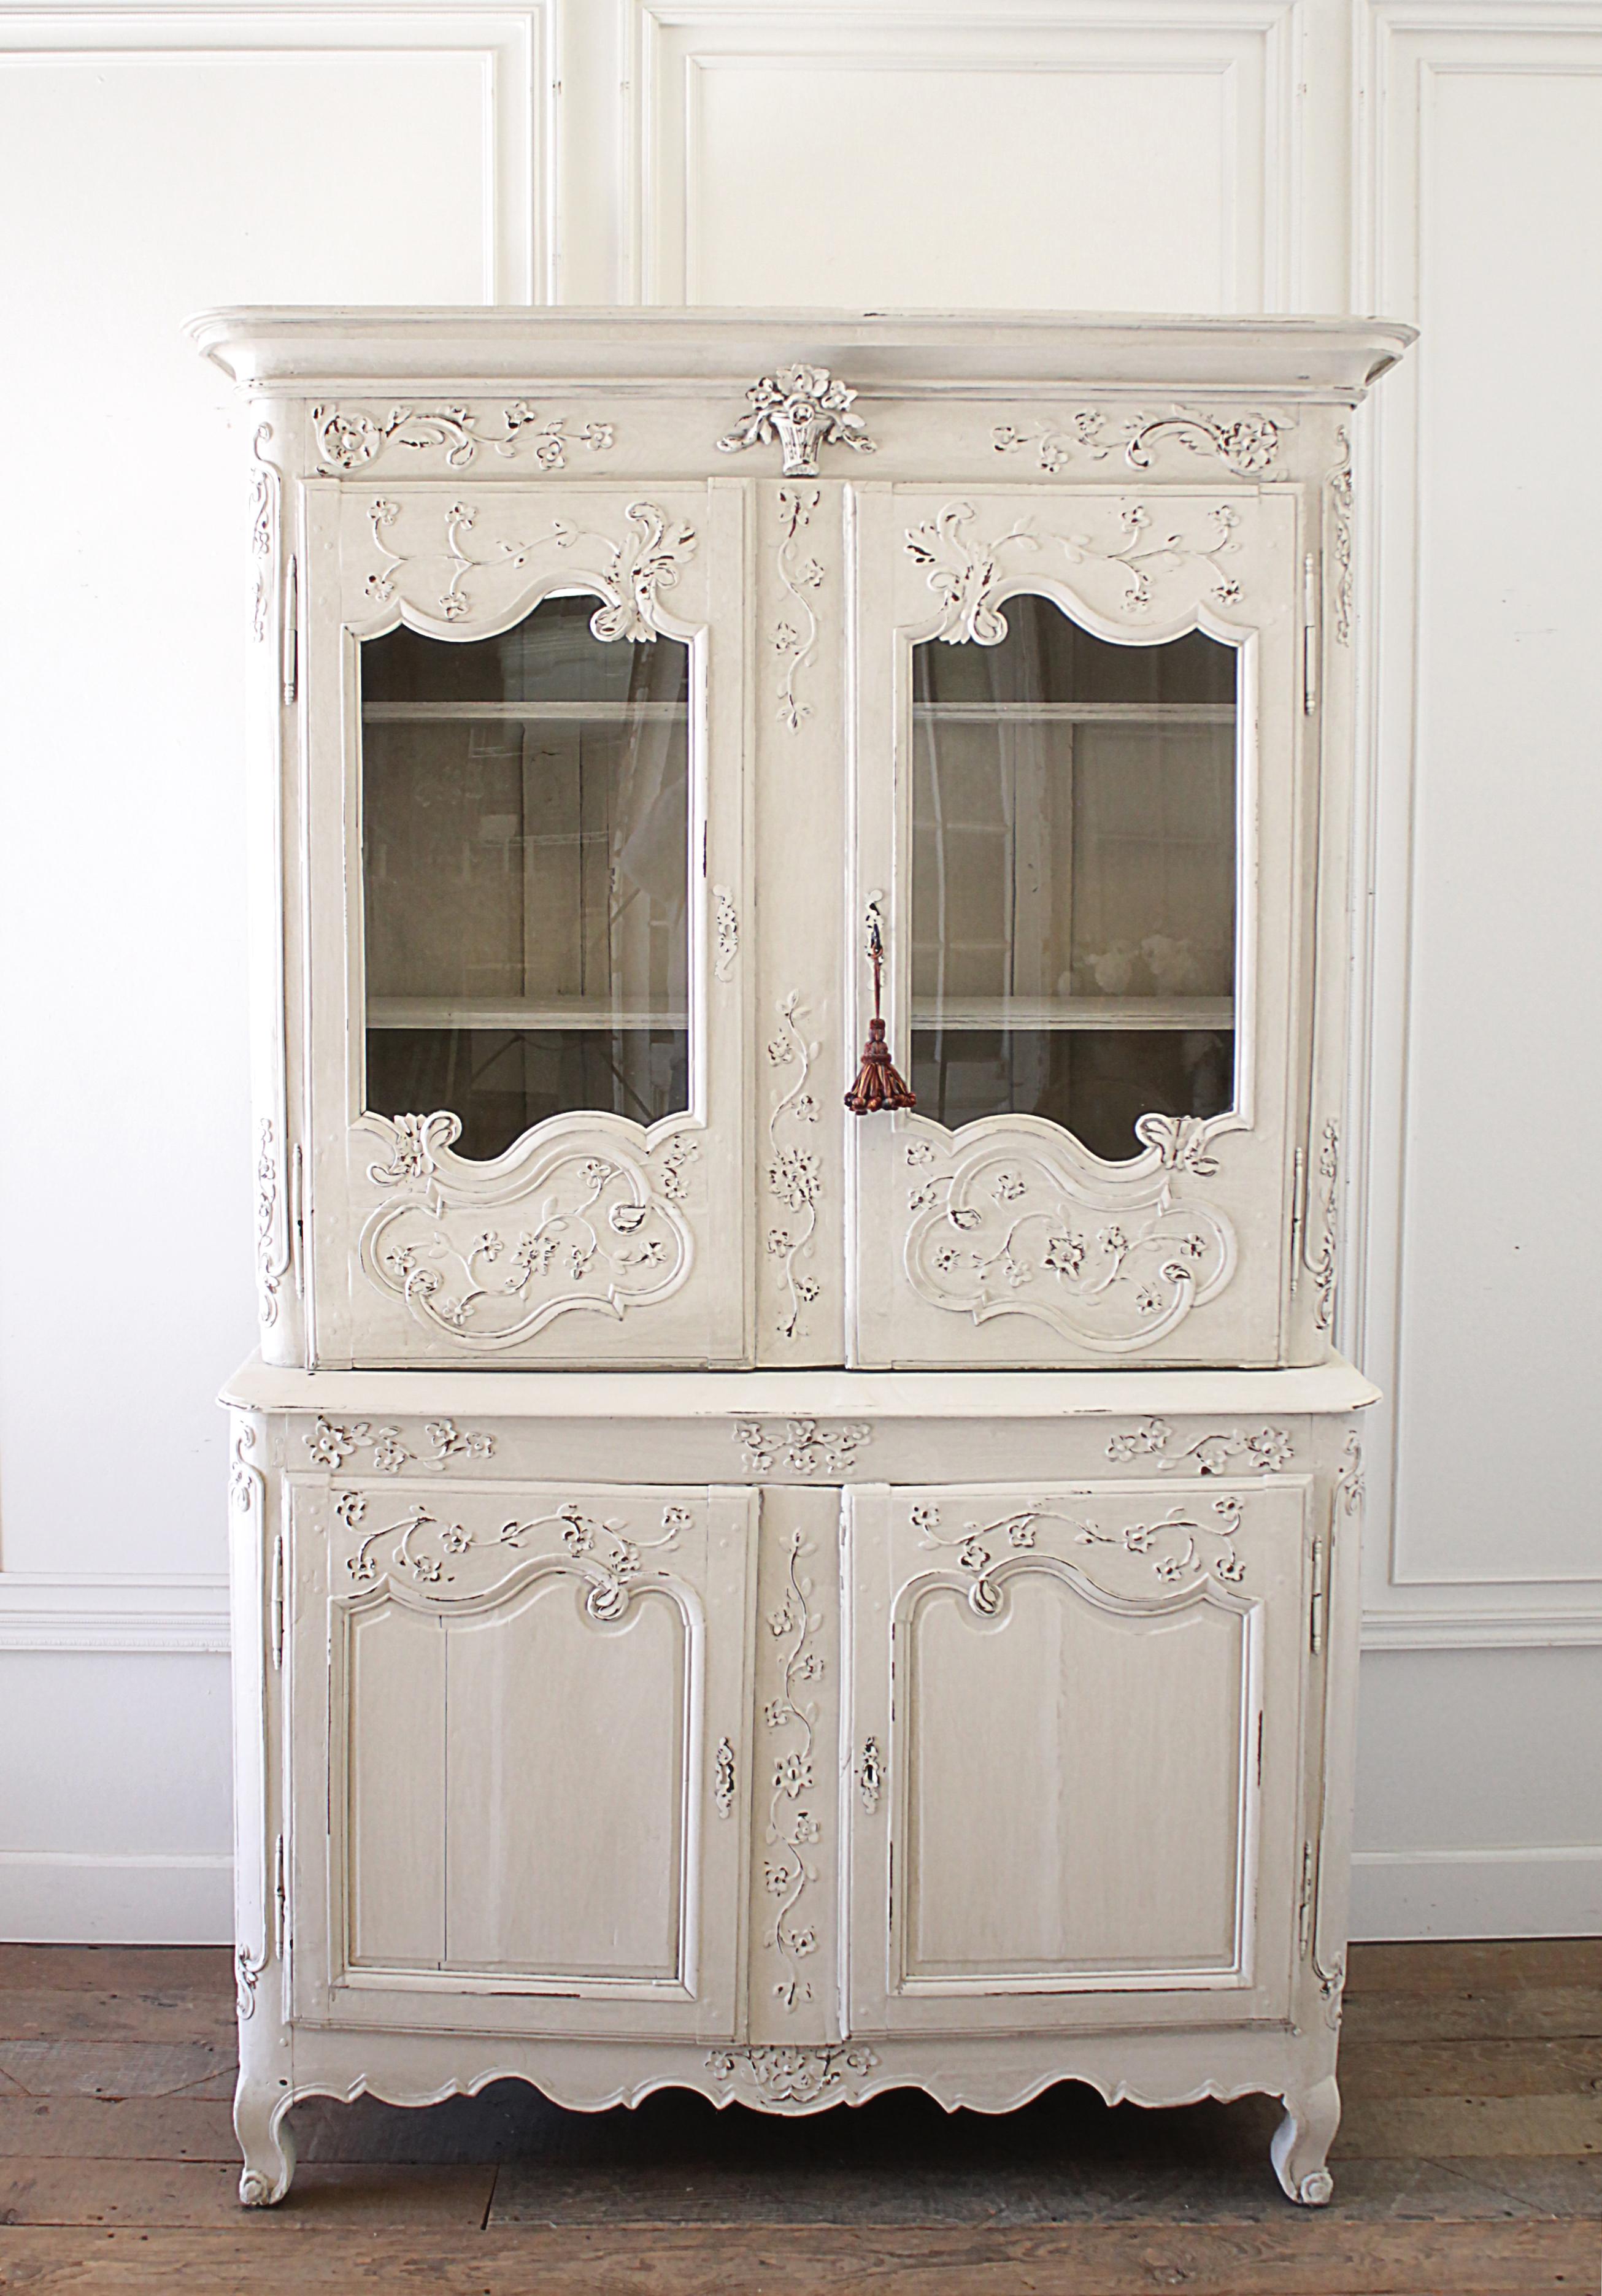 Antique Louis XV buffet deux corps from the Normandy region of France in beautifully painted soft white oakwood with distressed patina, intricately hand carved doors and updated with glass replacements for the panels. Nicely carved with flower